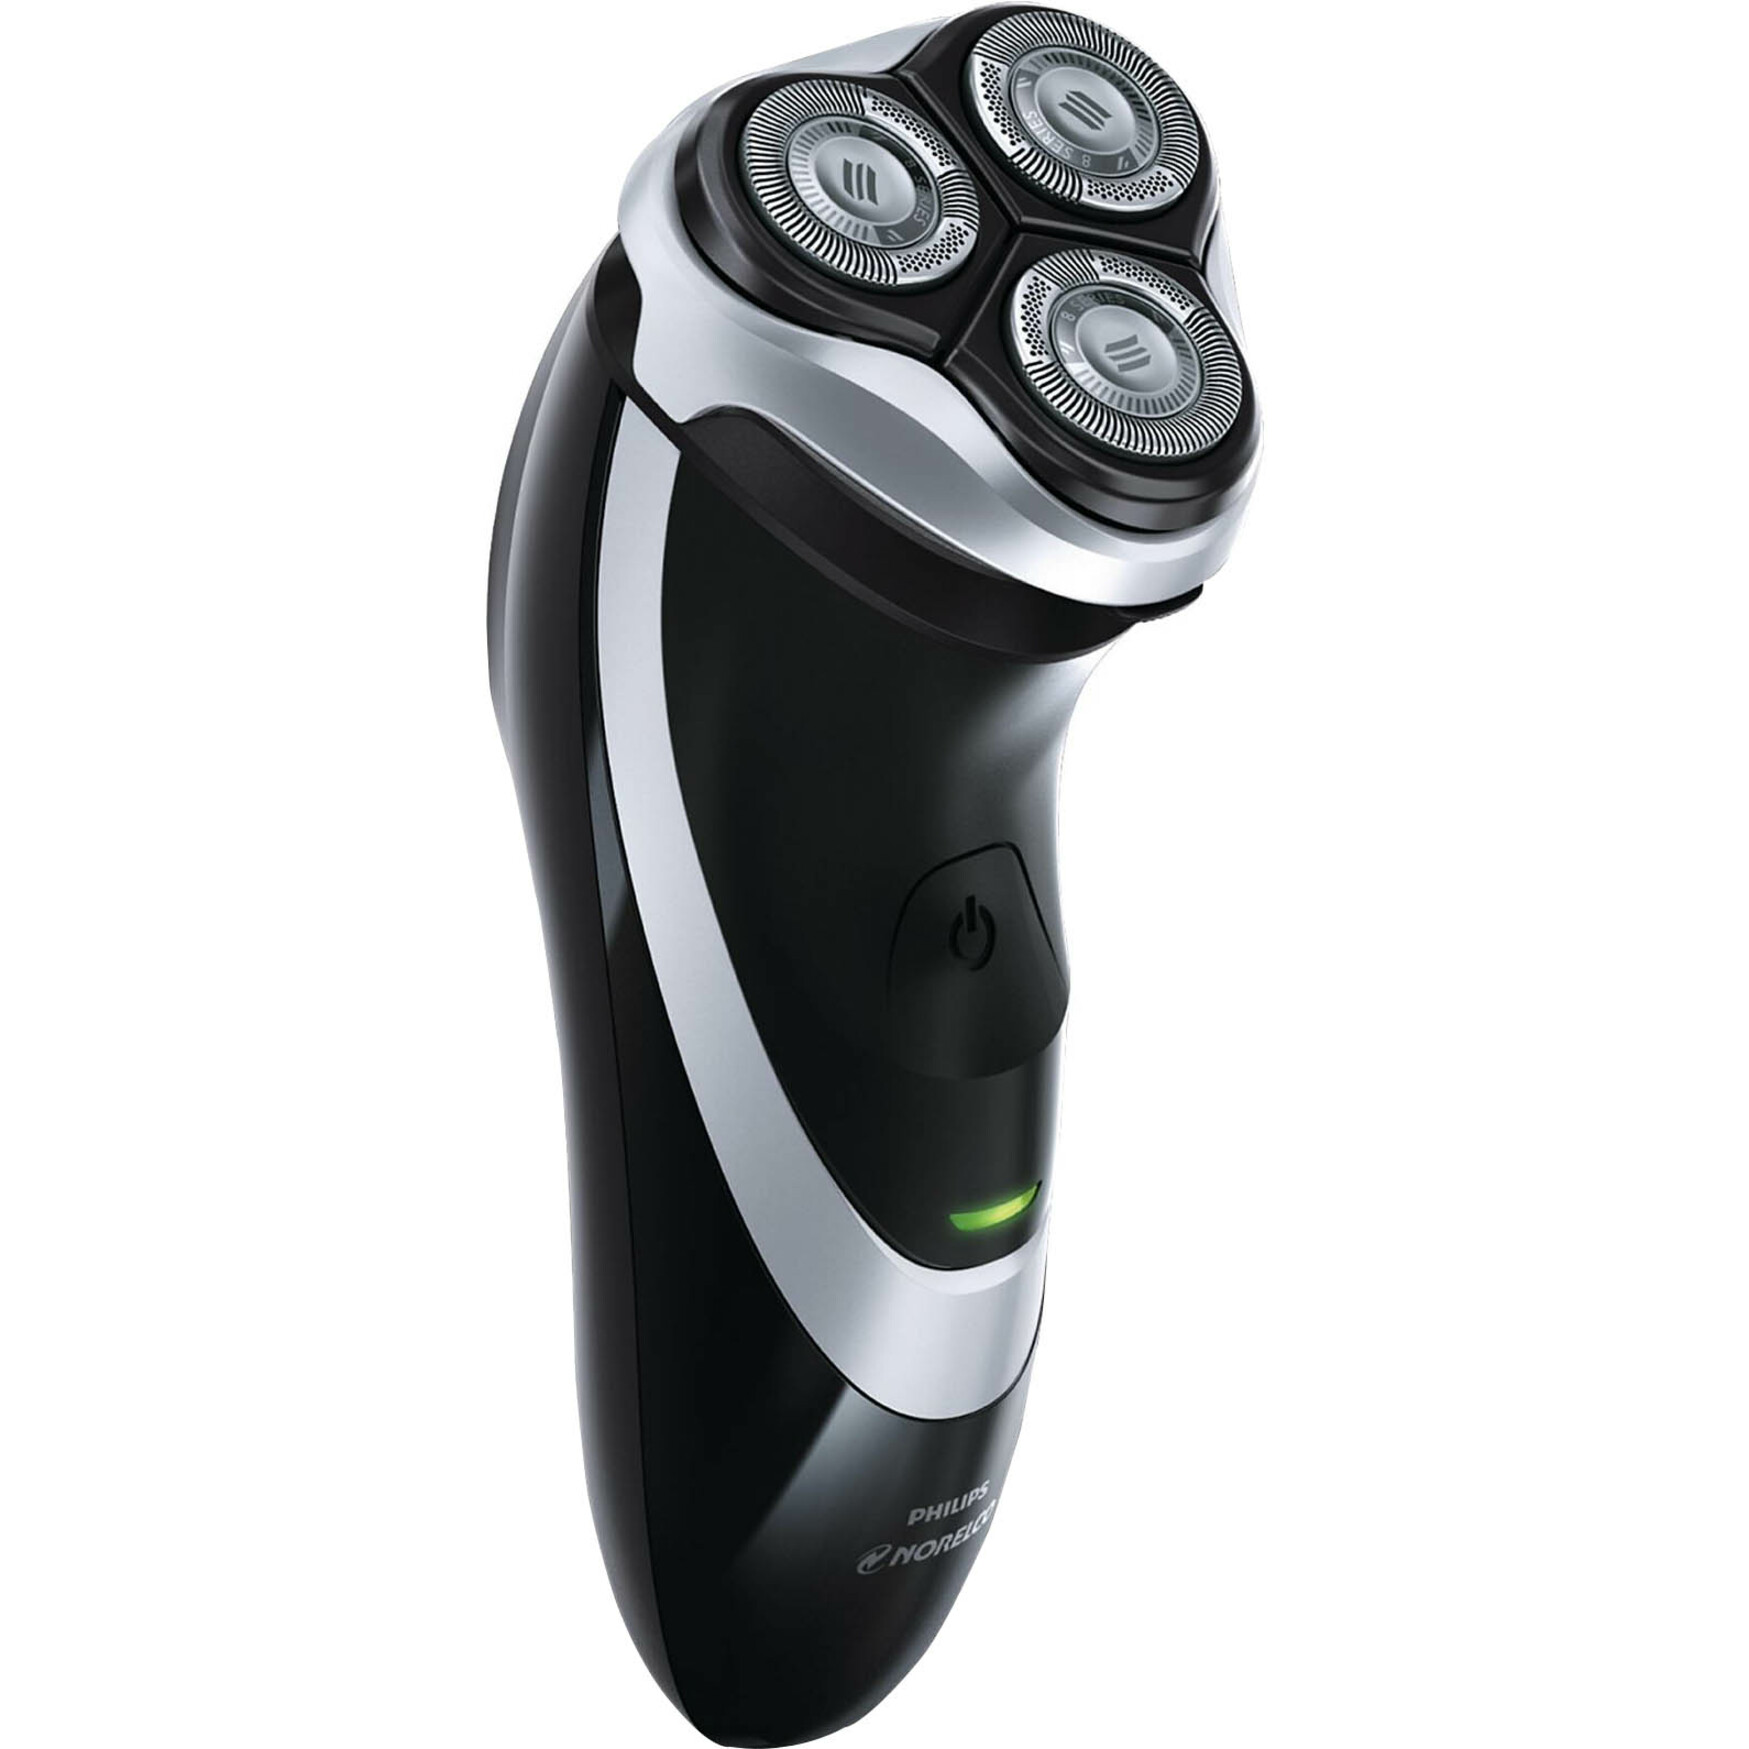 Philips Norelco  Shaver, 1 ea - image 1 of 5